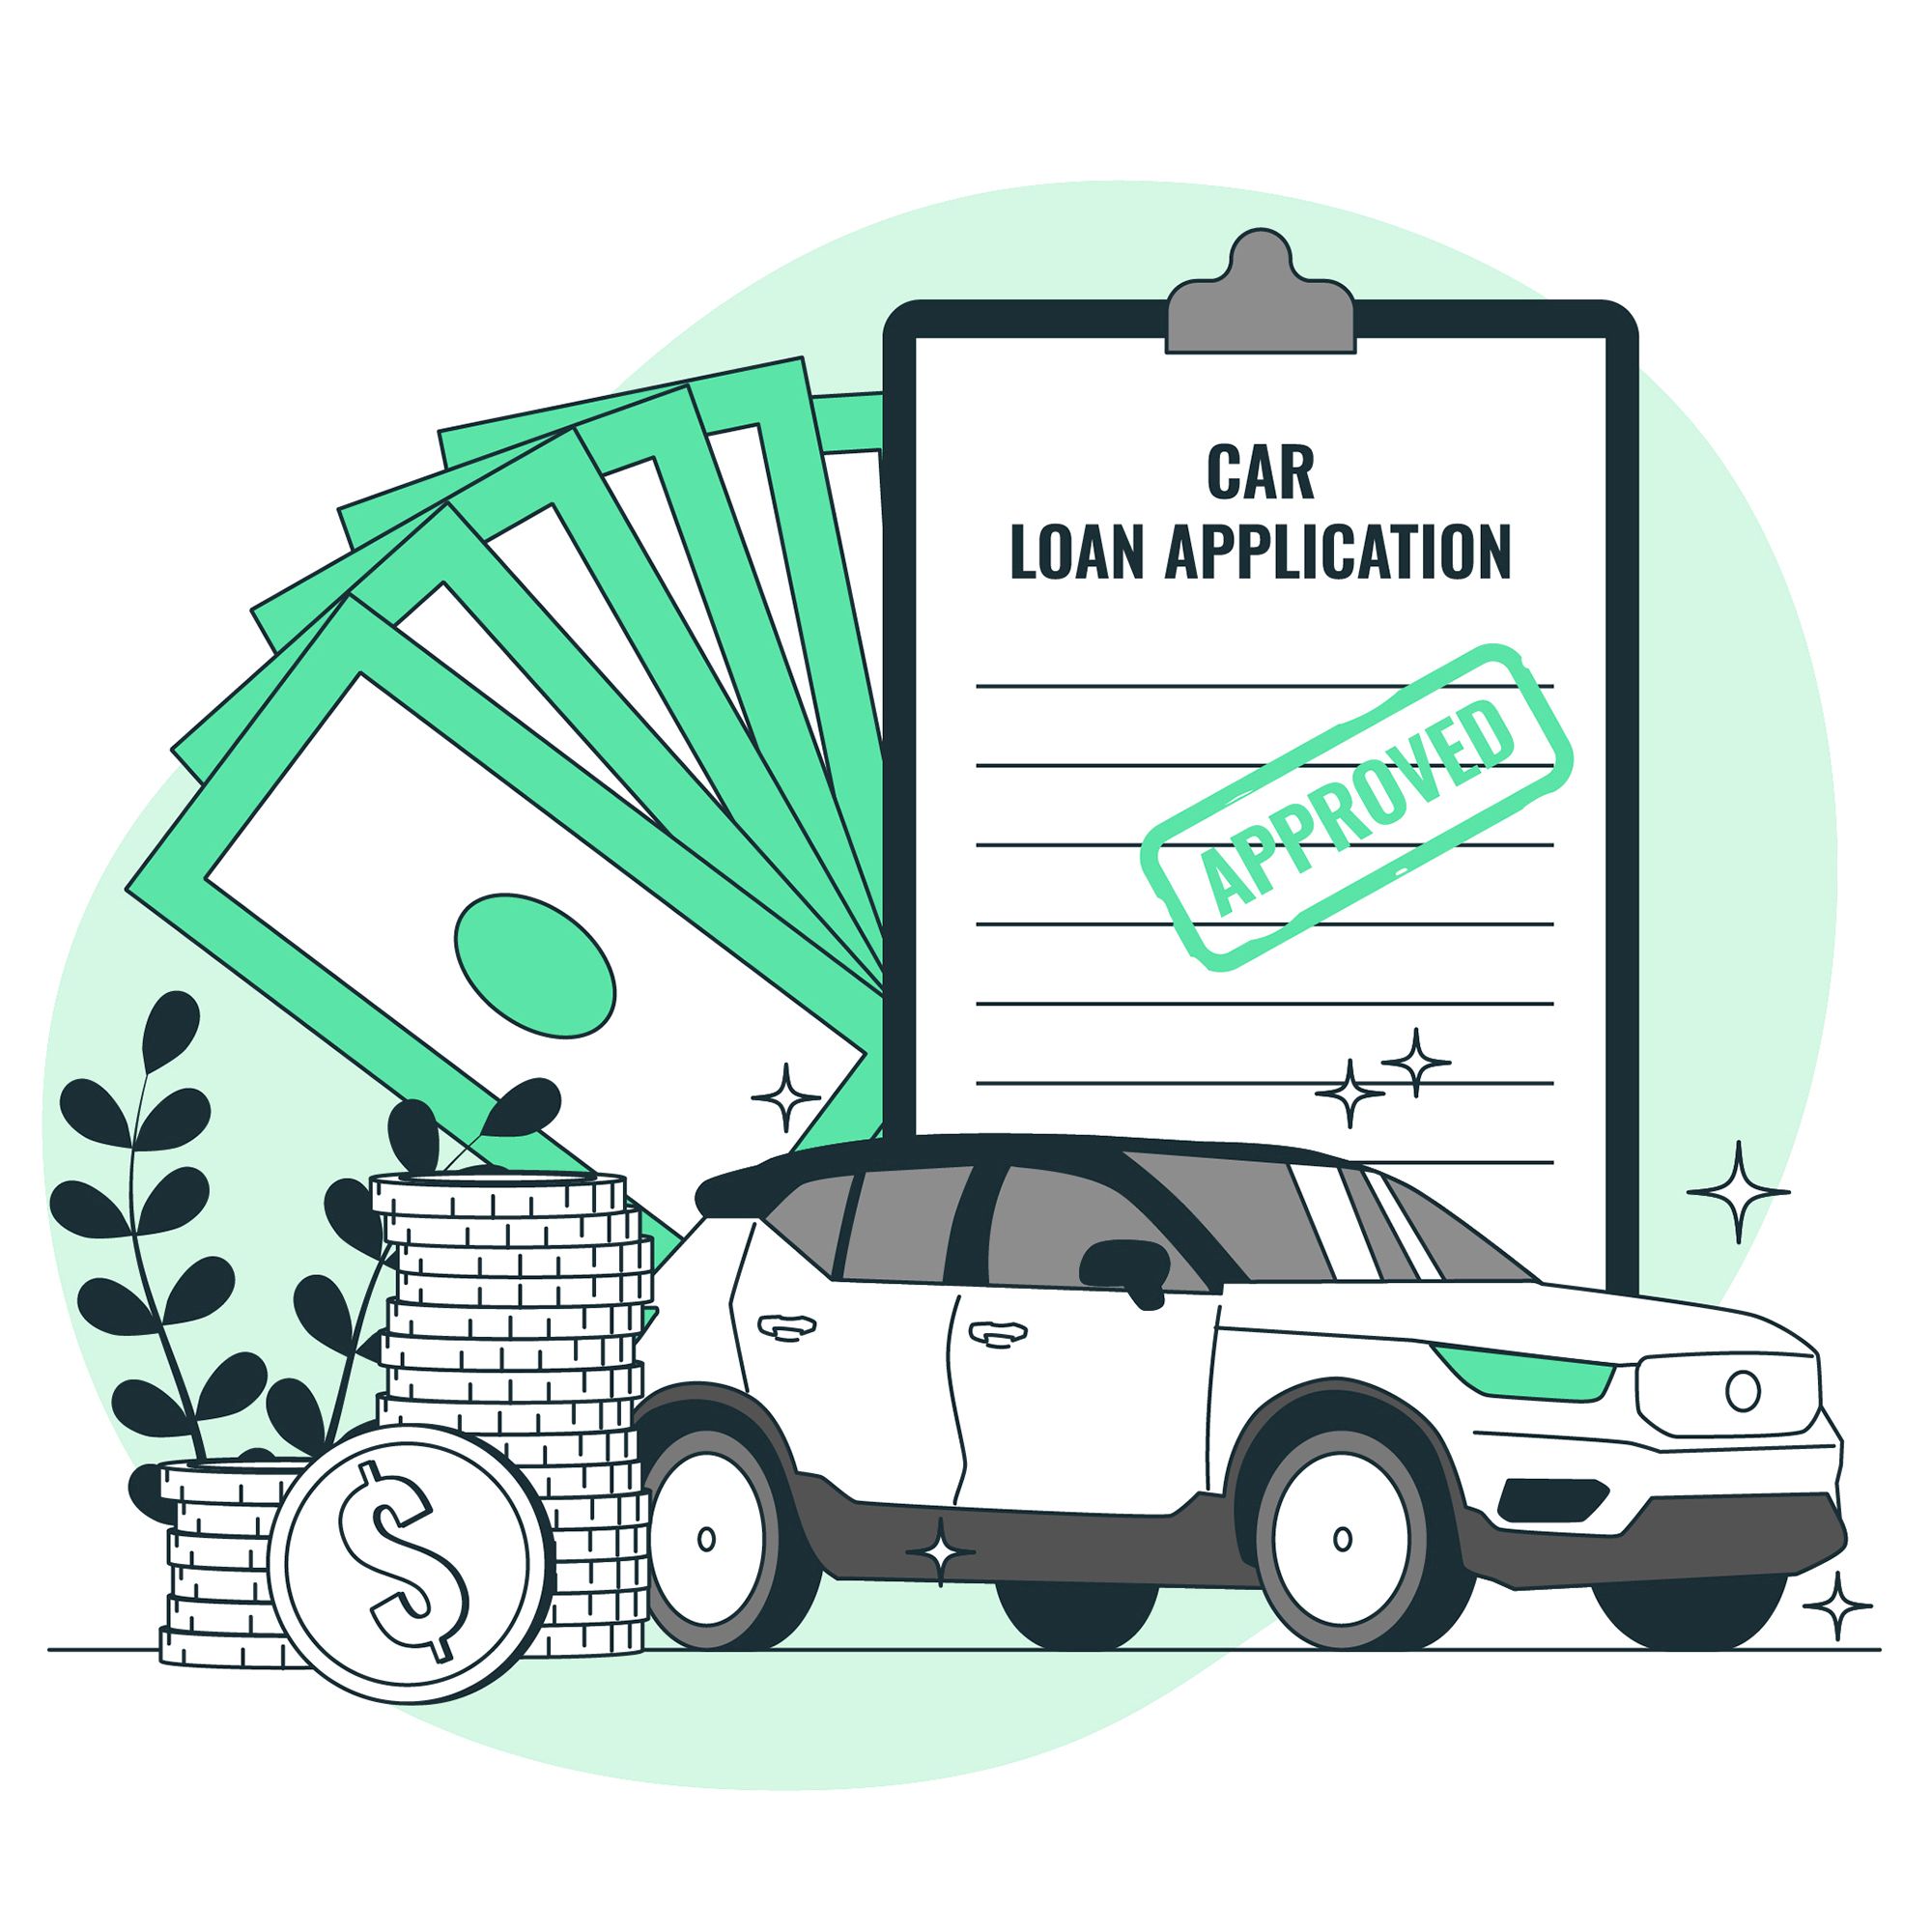 Tips for Getting the Best Car Loan Rates